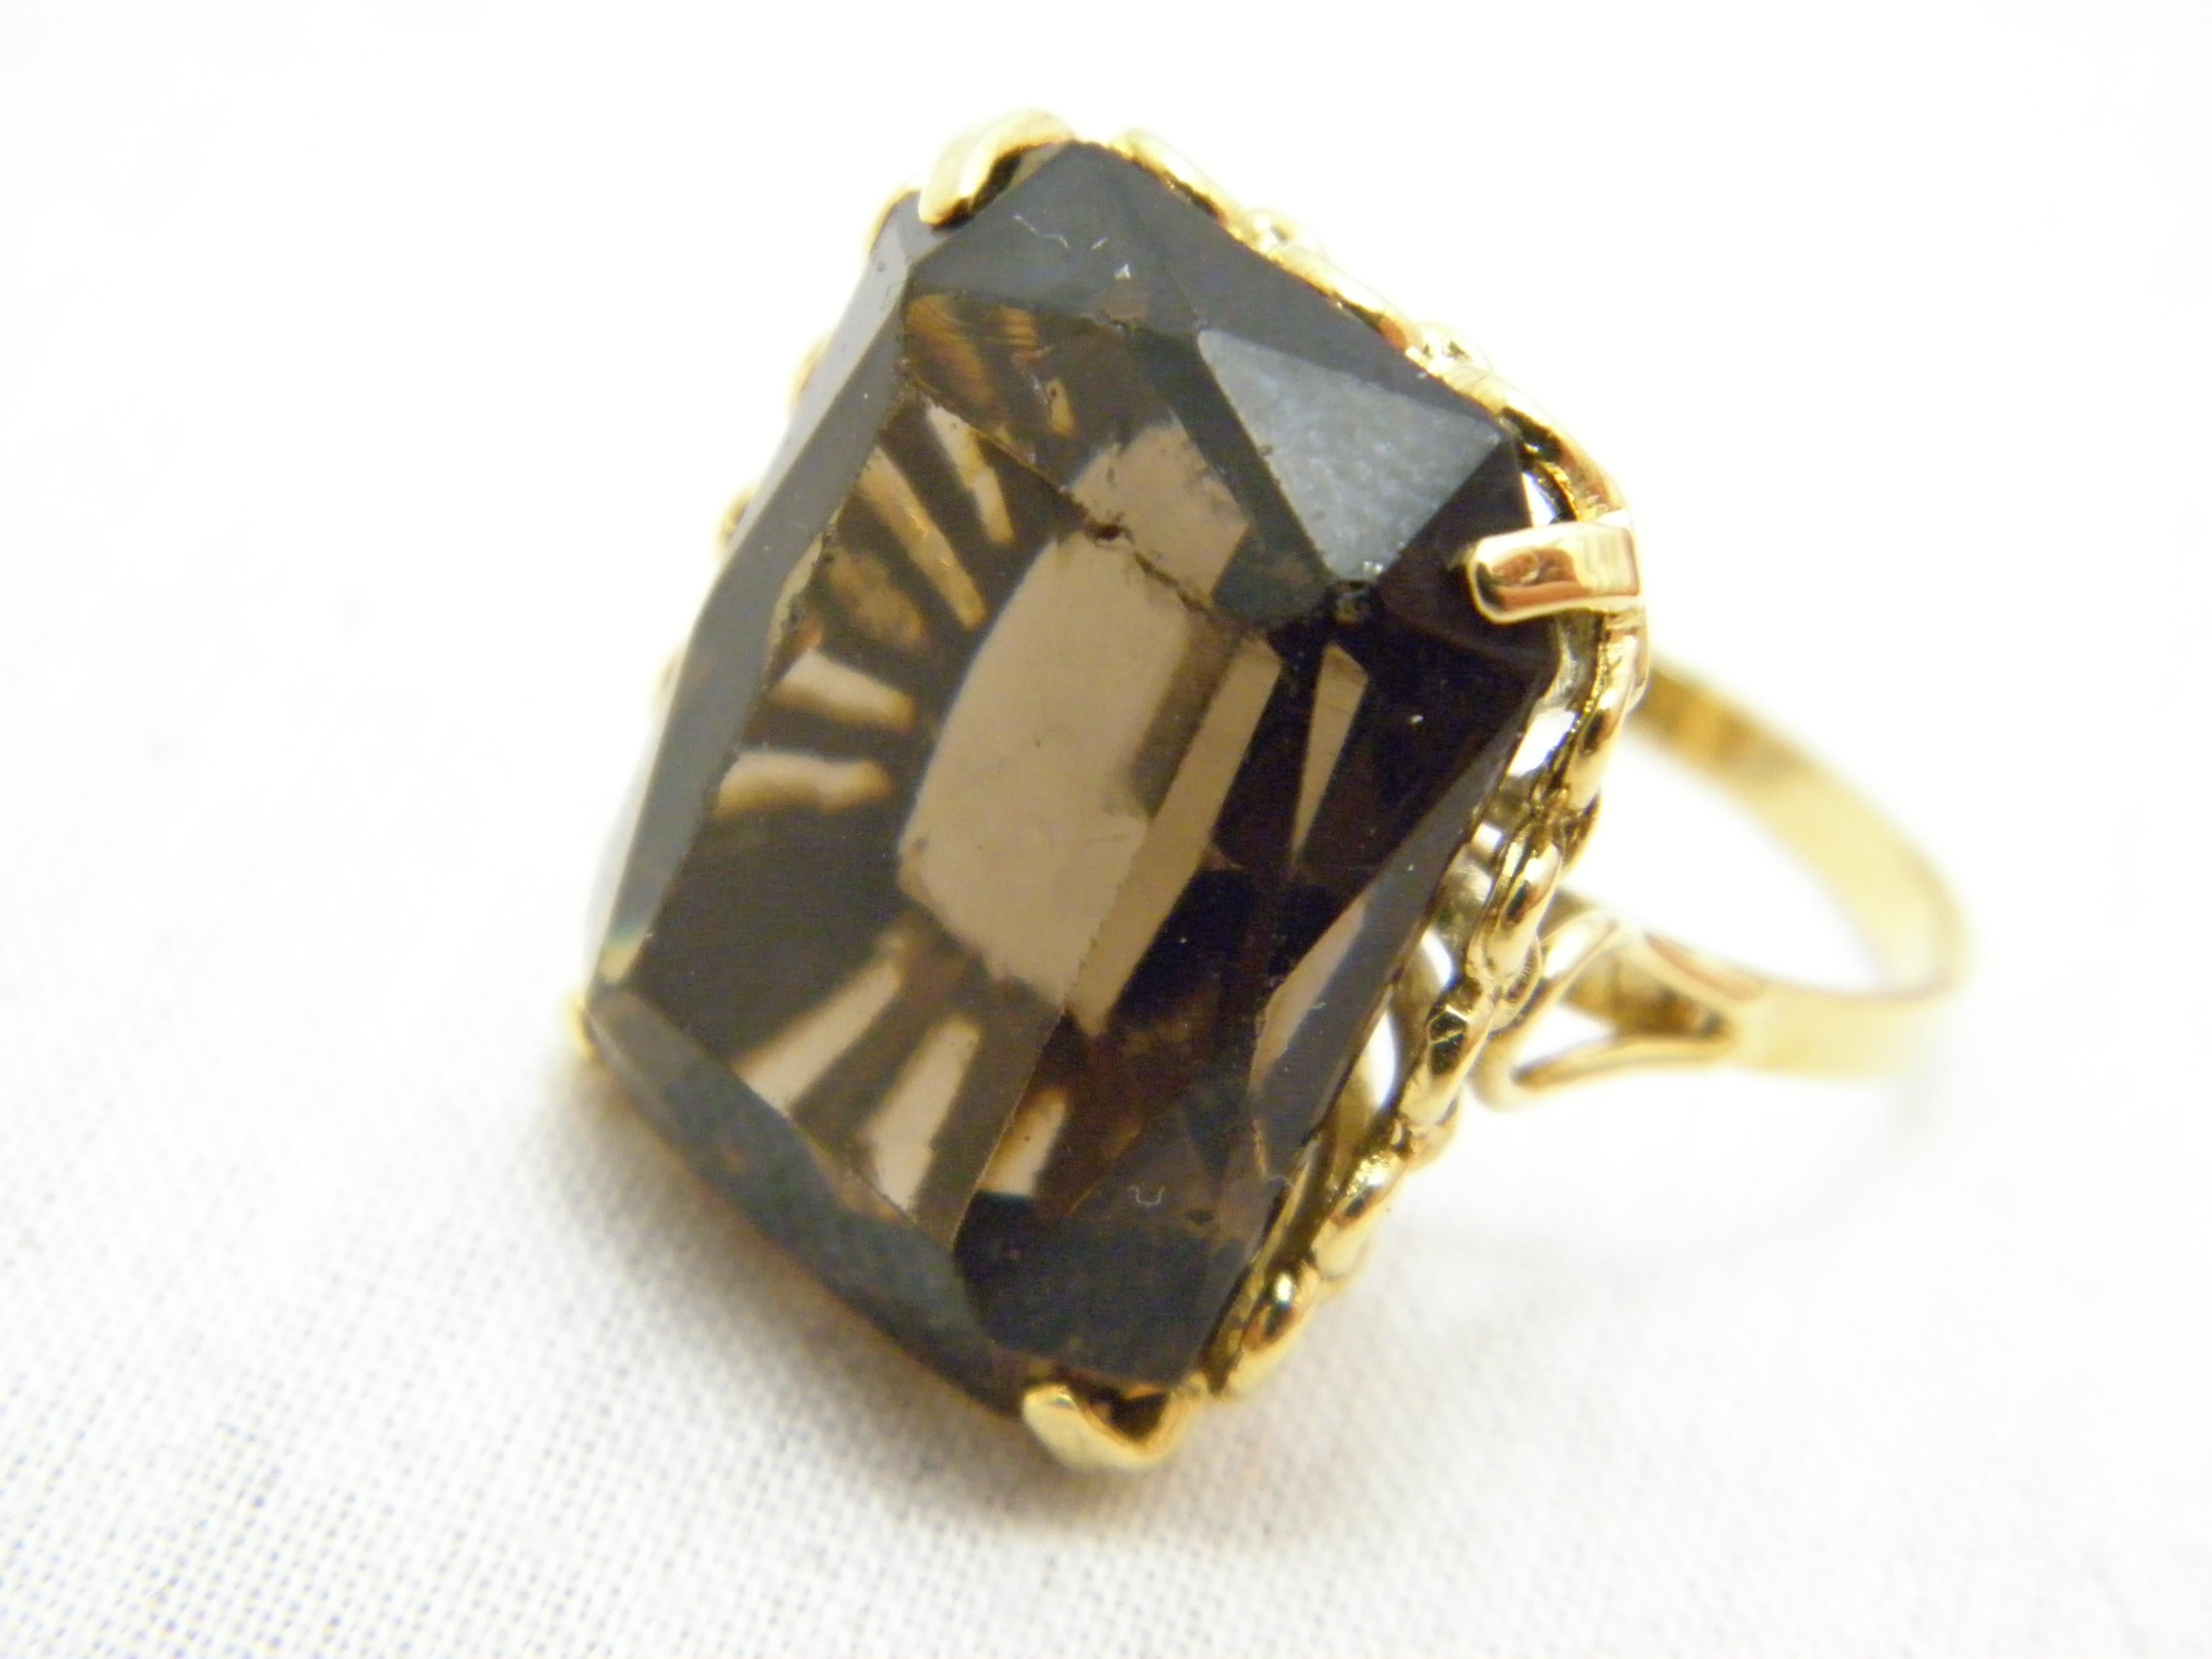 For your consideration I have this incredible:

18CT GOLD SMOKY QUARTZ HUGE SOLITAIRE STATEMENT SIGNET RING

DETAILS
Material: 18ct 750/000 Yellow Gold - VERY heavy
This ring has a very thick and sturdy shank hence ideal if resizing needed
Style: